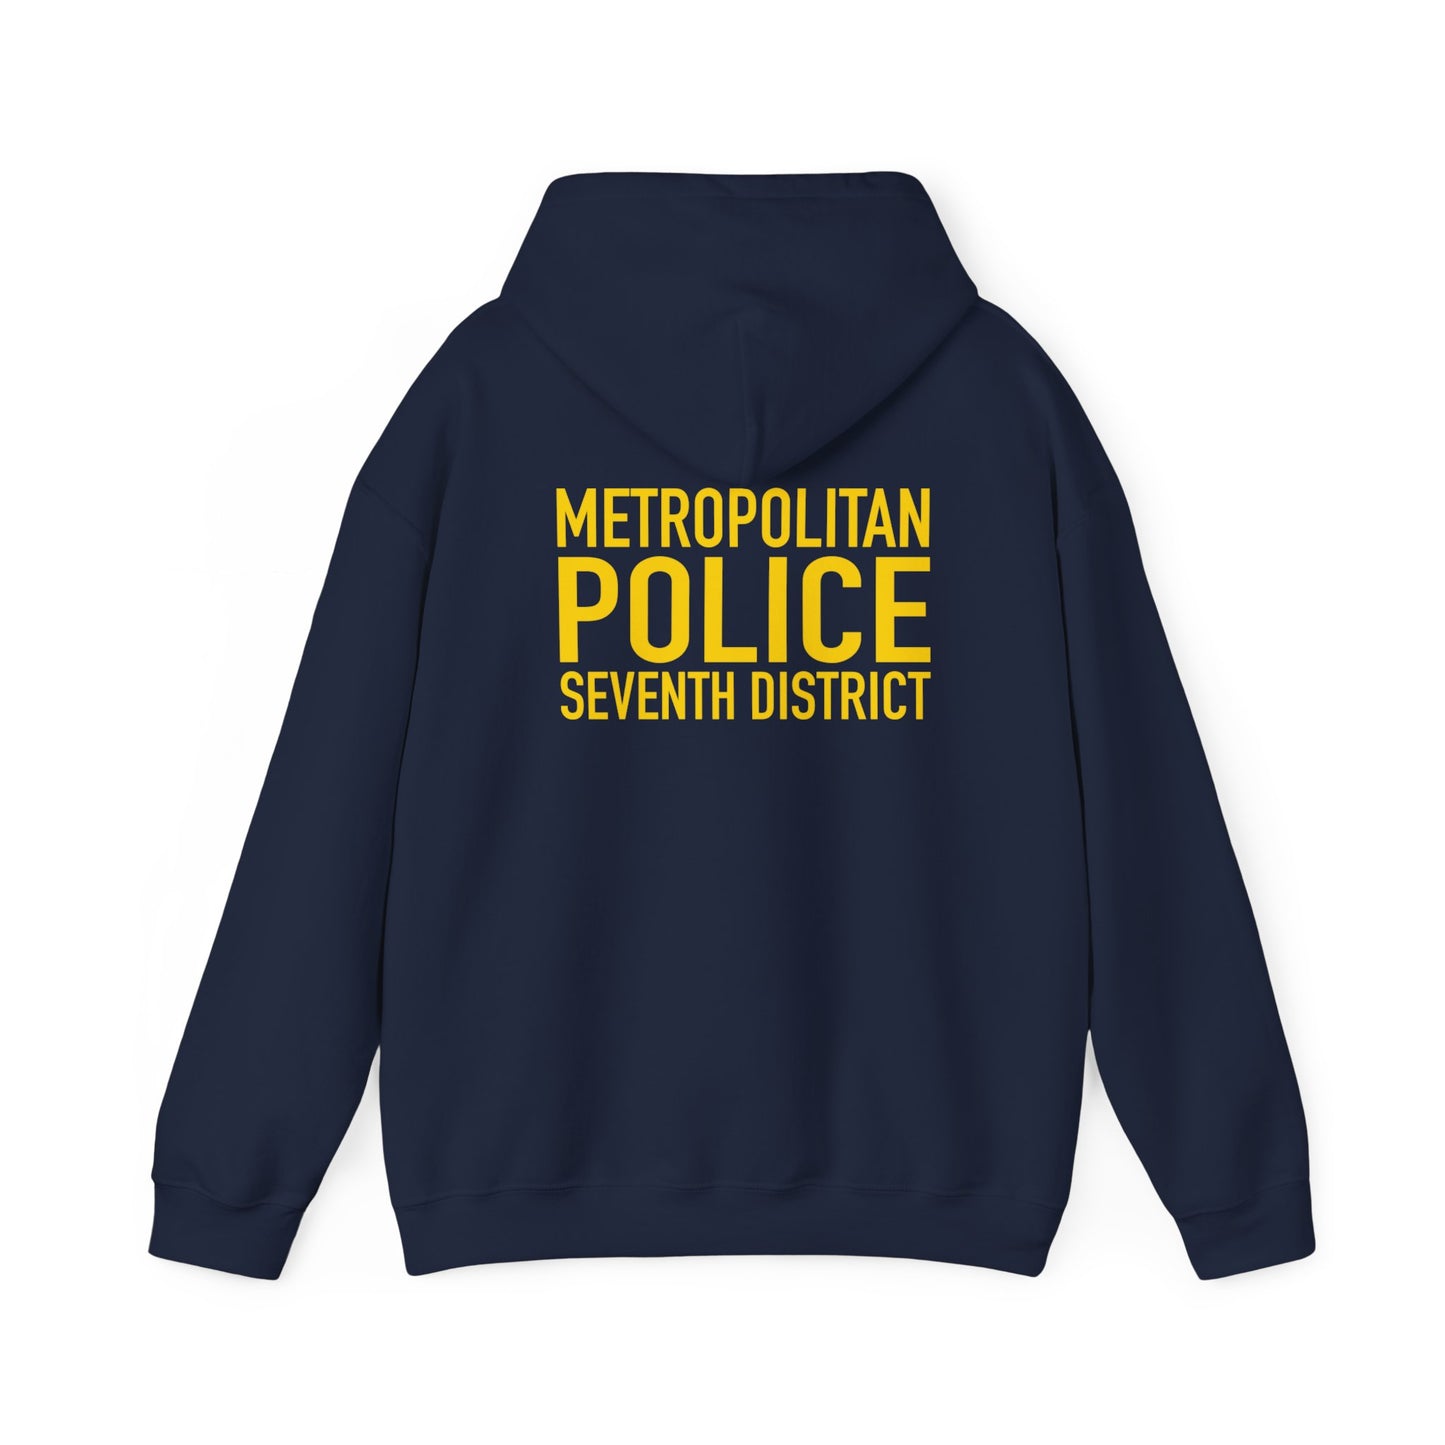 Classic MPD Seventh District Hooded Sweatshirt